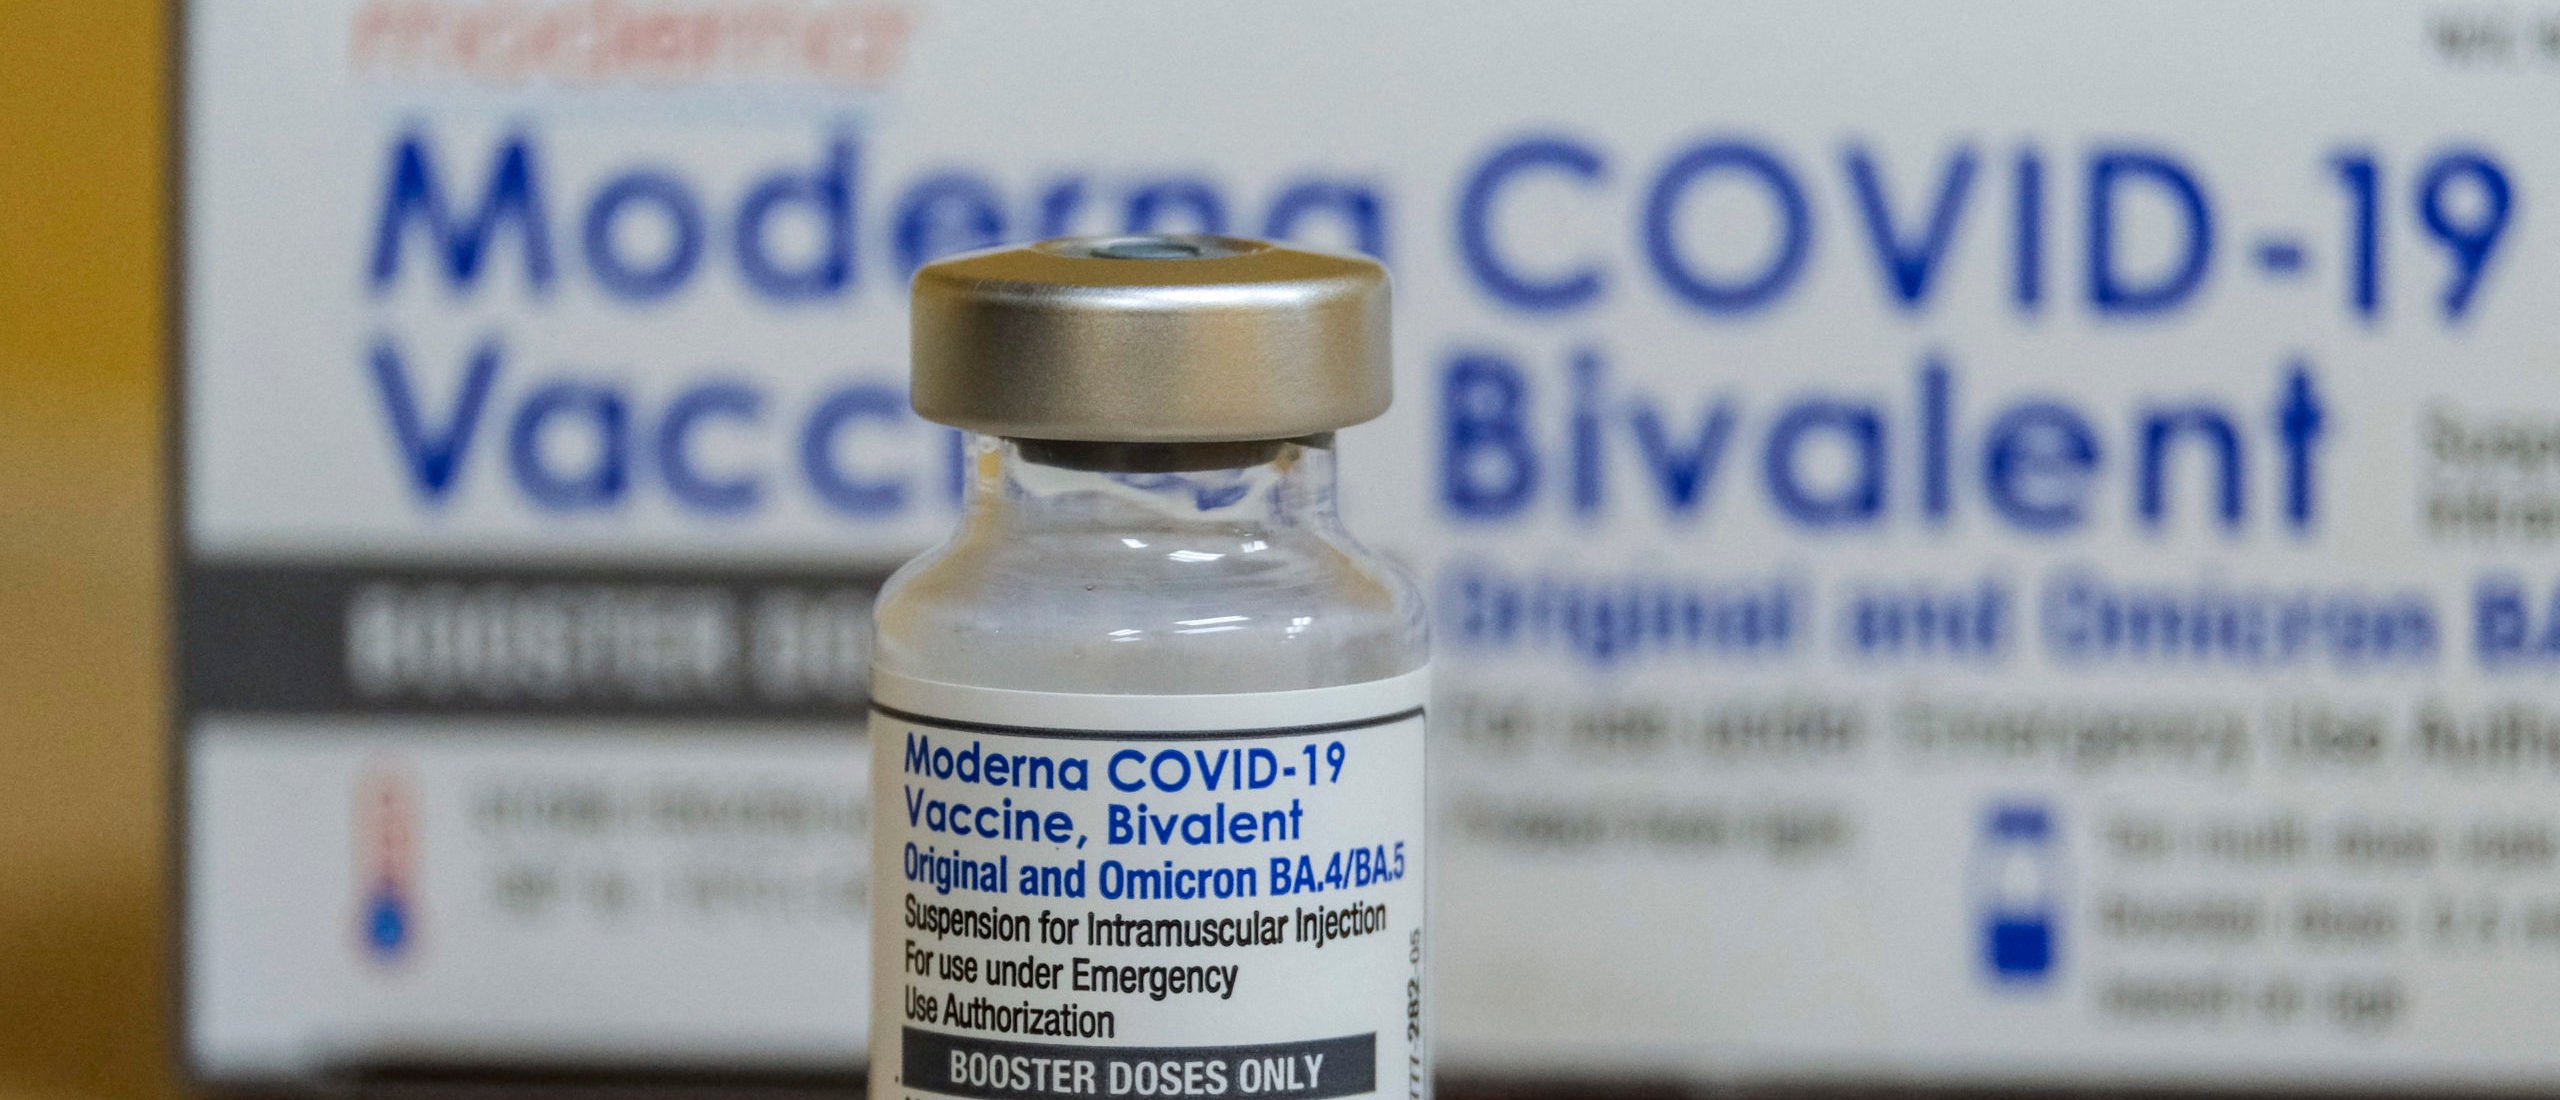 This photo shows a vial of the Moderna Covid-19 vaccine, Bivalent, at AltaMed Medical clinic in Los Angeles, California, on October 6, 2022. (Photo by RINGO CHIU/AFP via Getty Images)